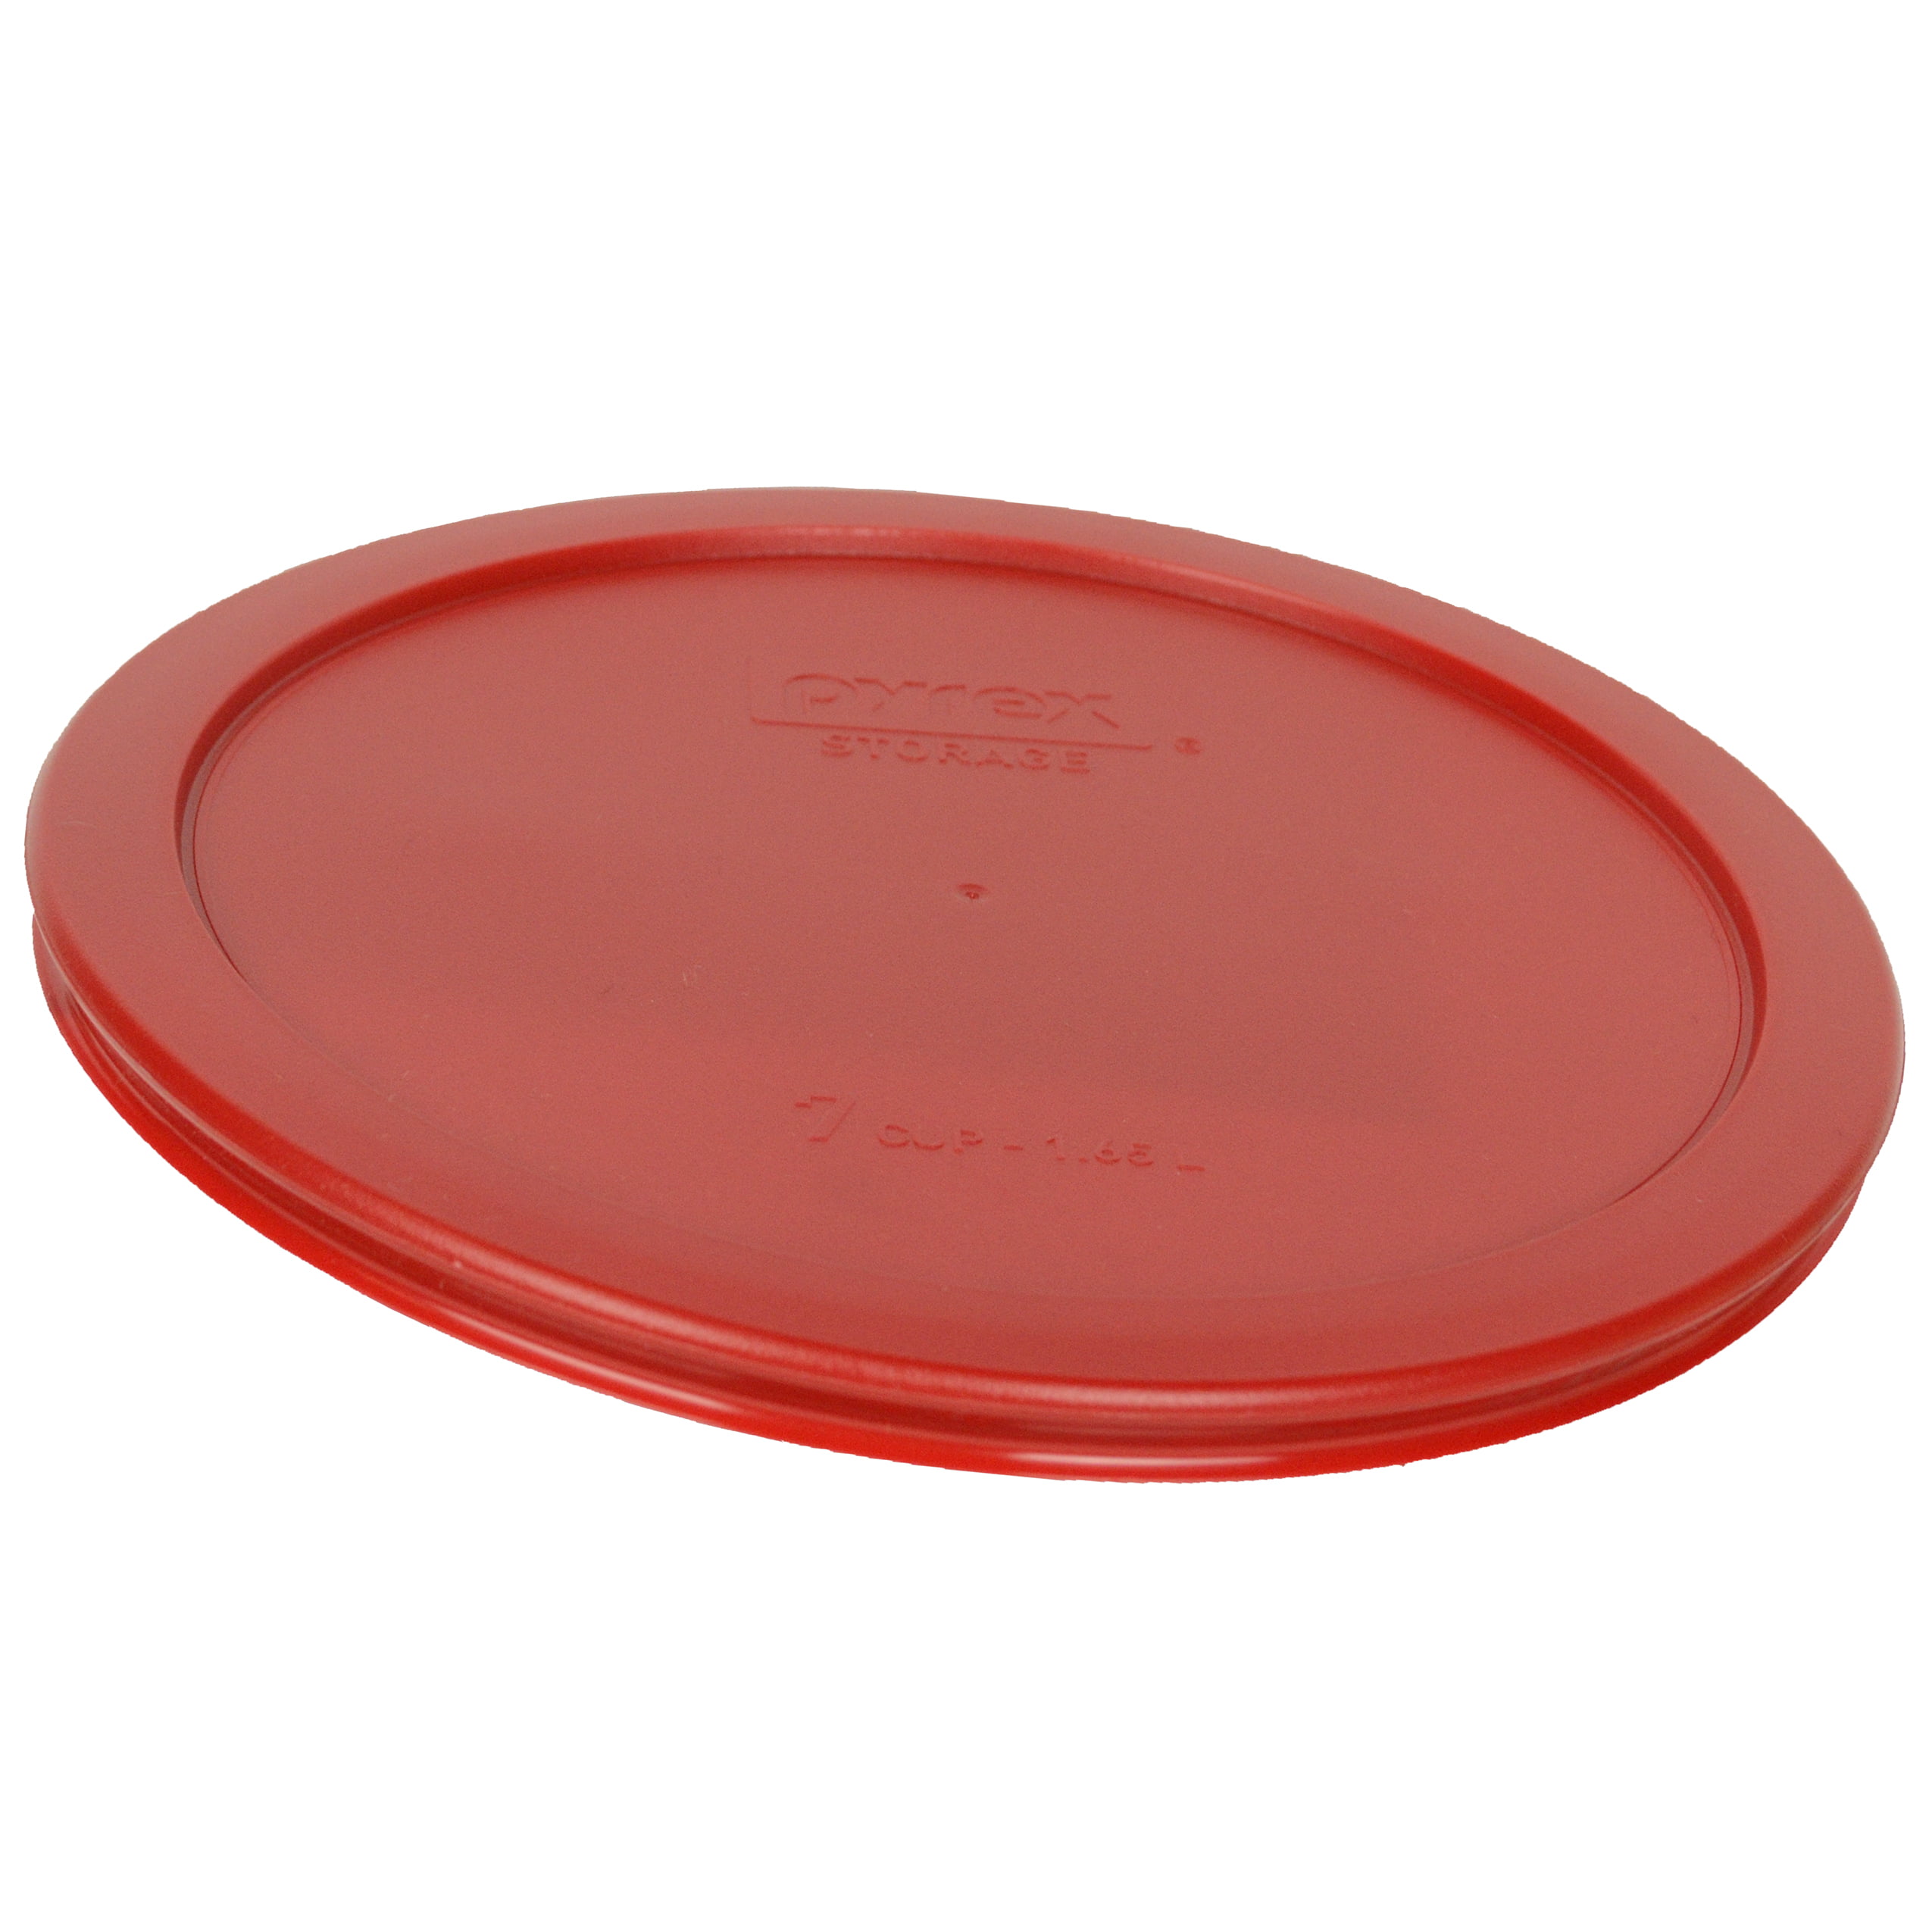 Pyrex Round 2 Cup Storage Container with Red Lid, 2 pc - Ralphs